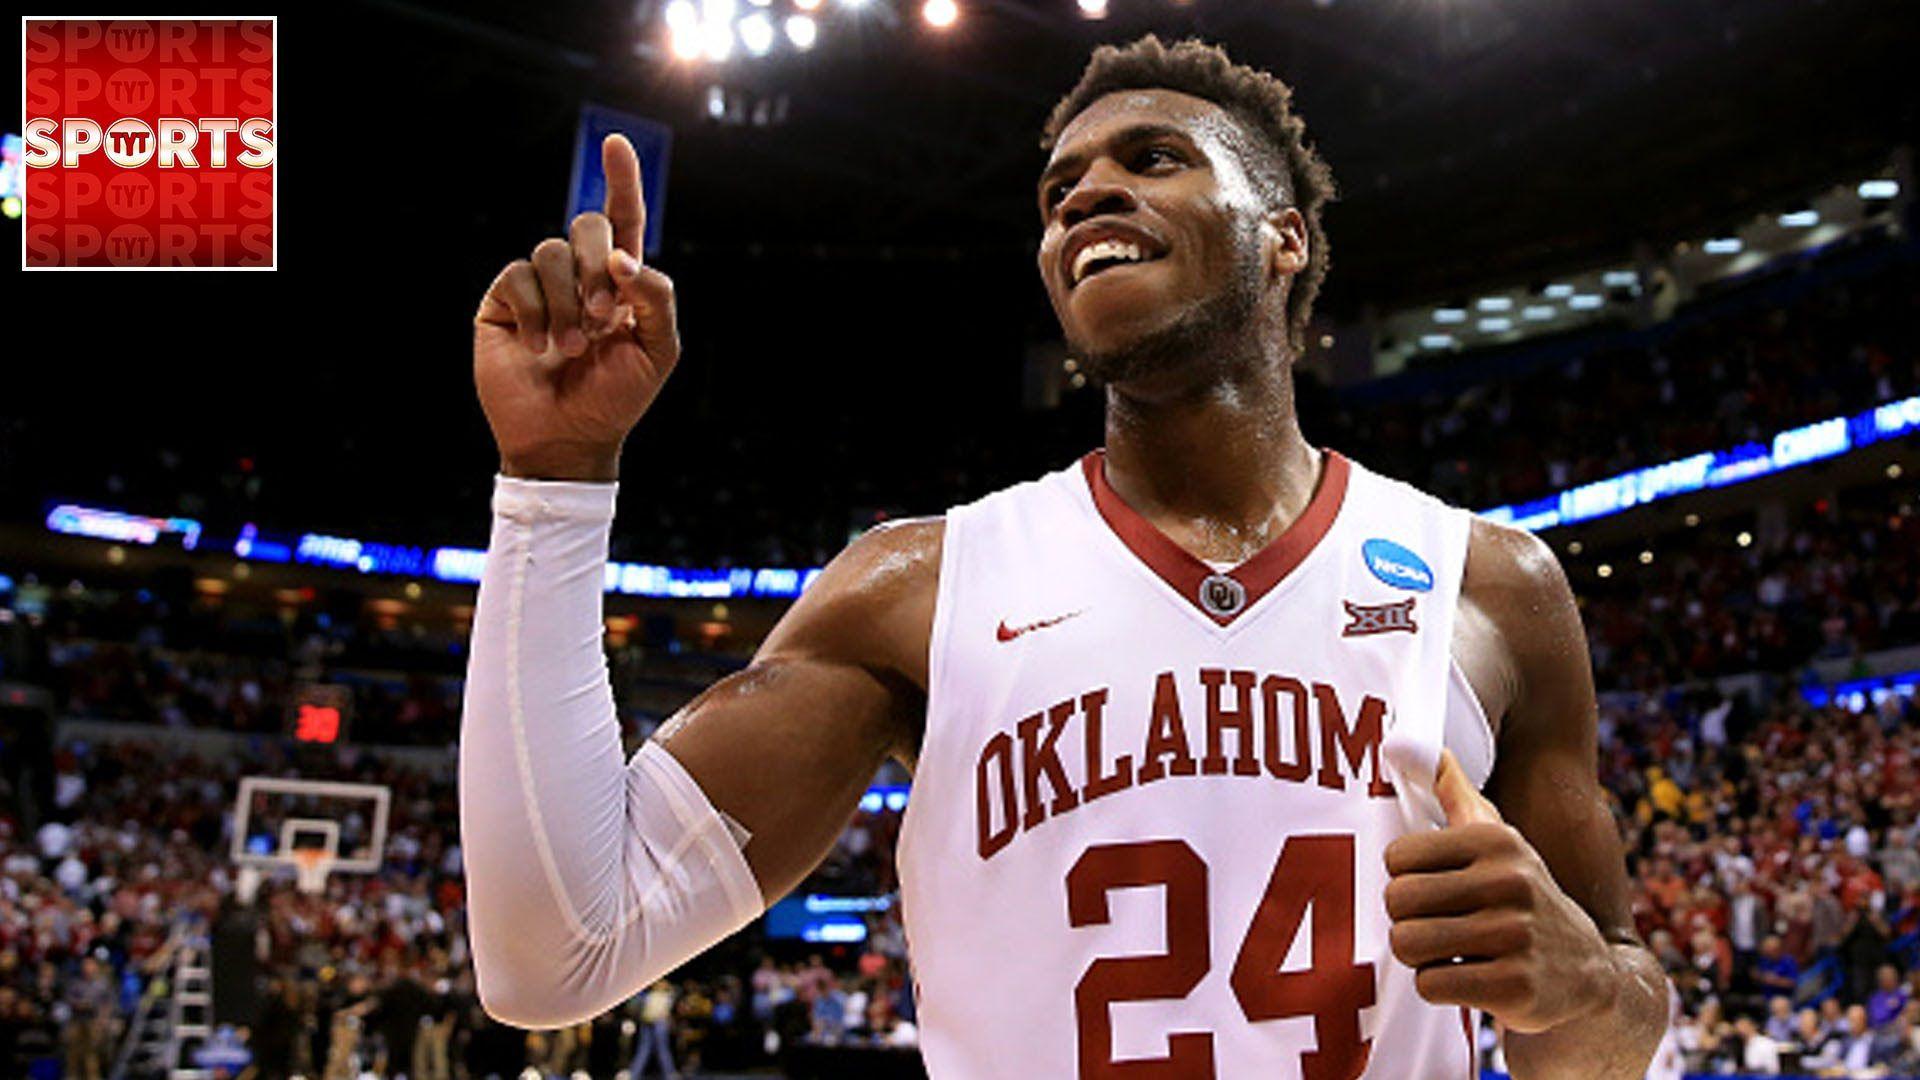 Buddy Hield Is Unstoppable, But Is He A NBA Draft Pick